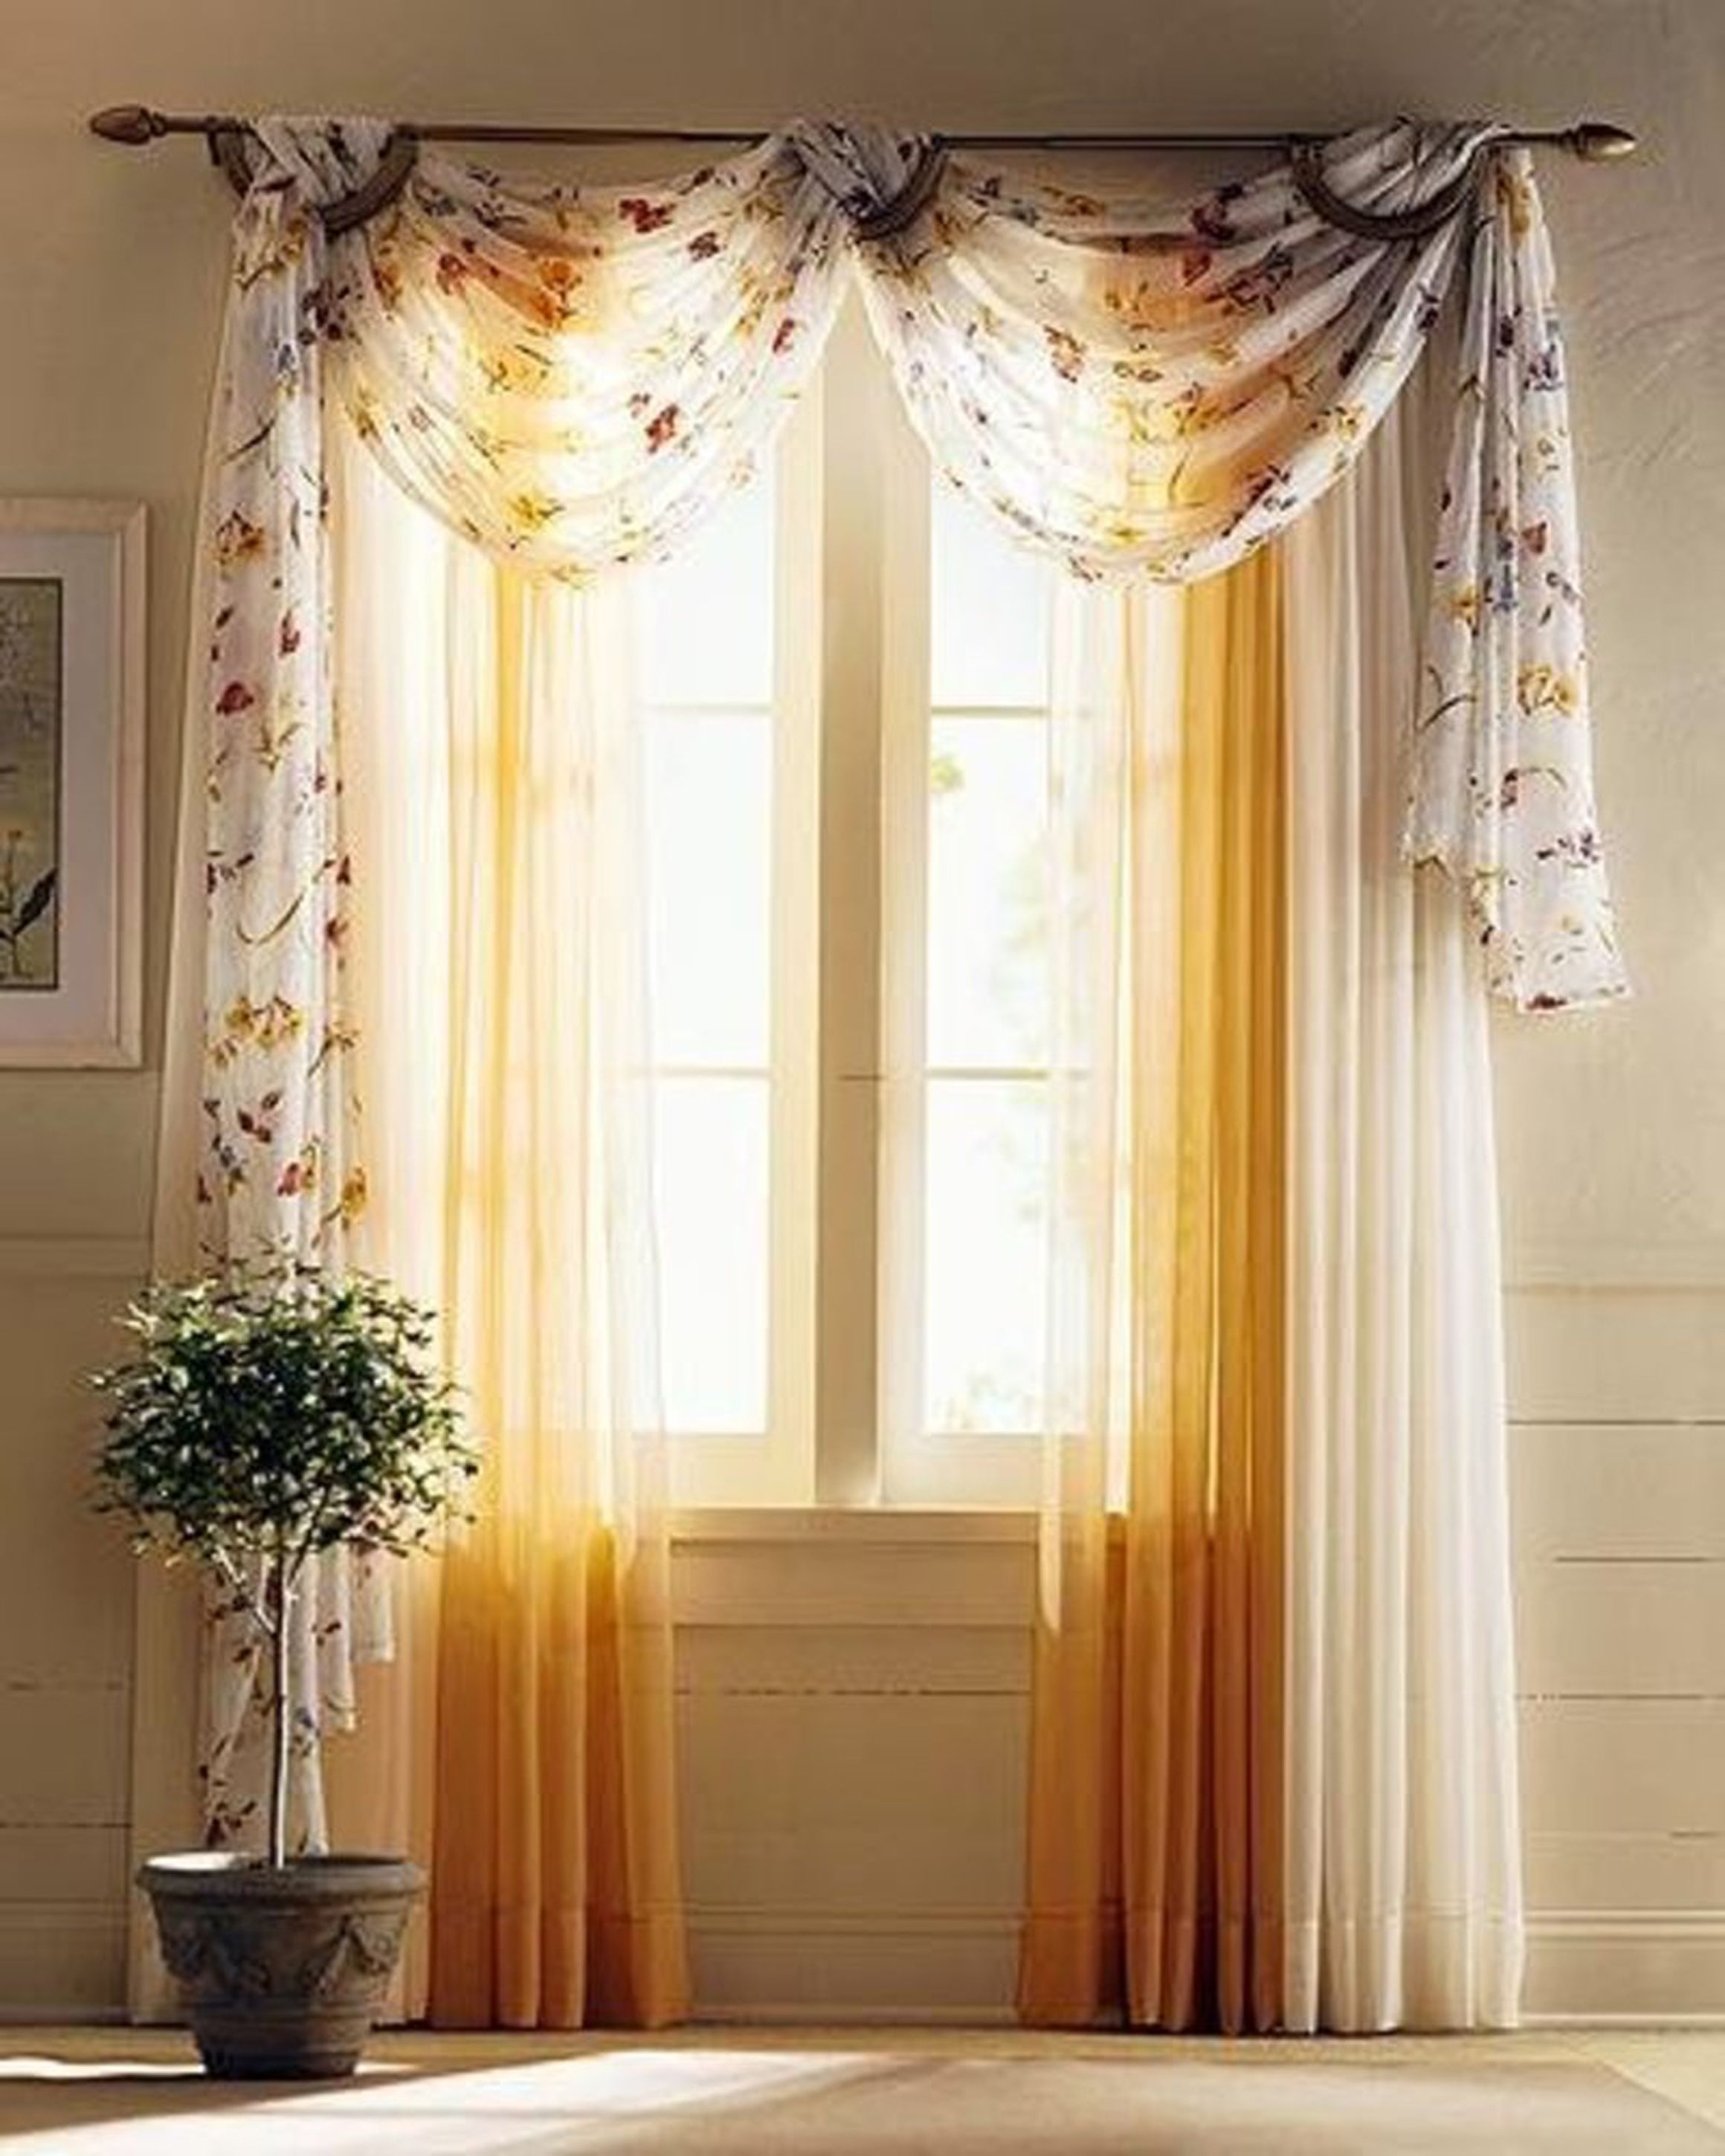 Drapery Curtain » Curtain Ideas For Living Room (View 1 of 39)